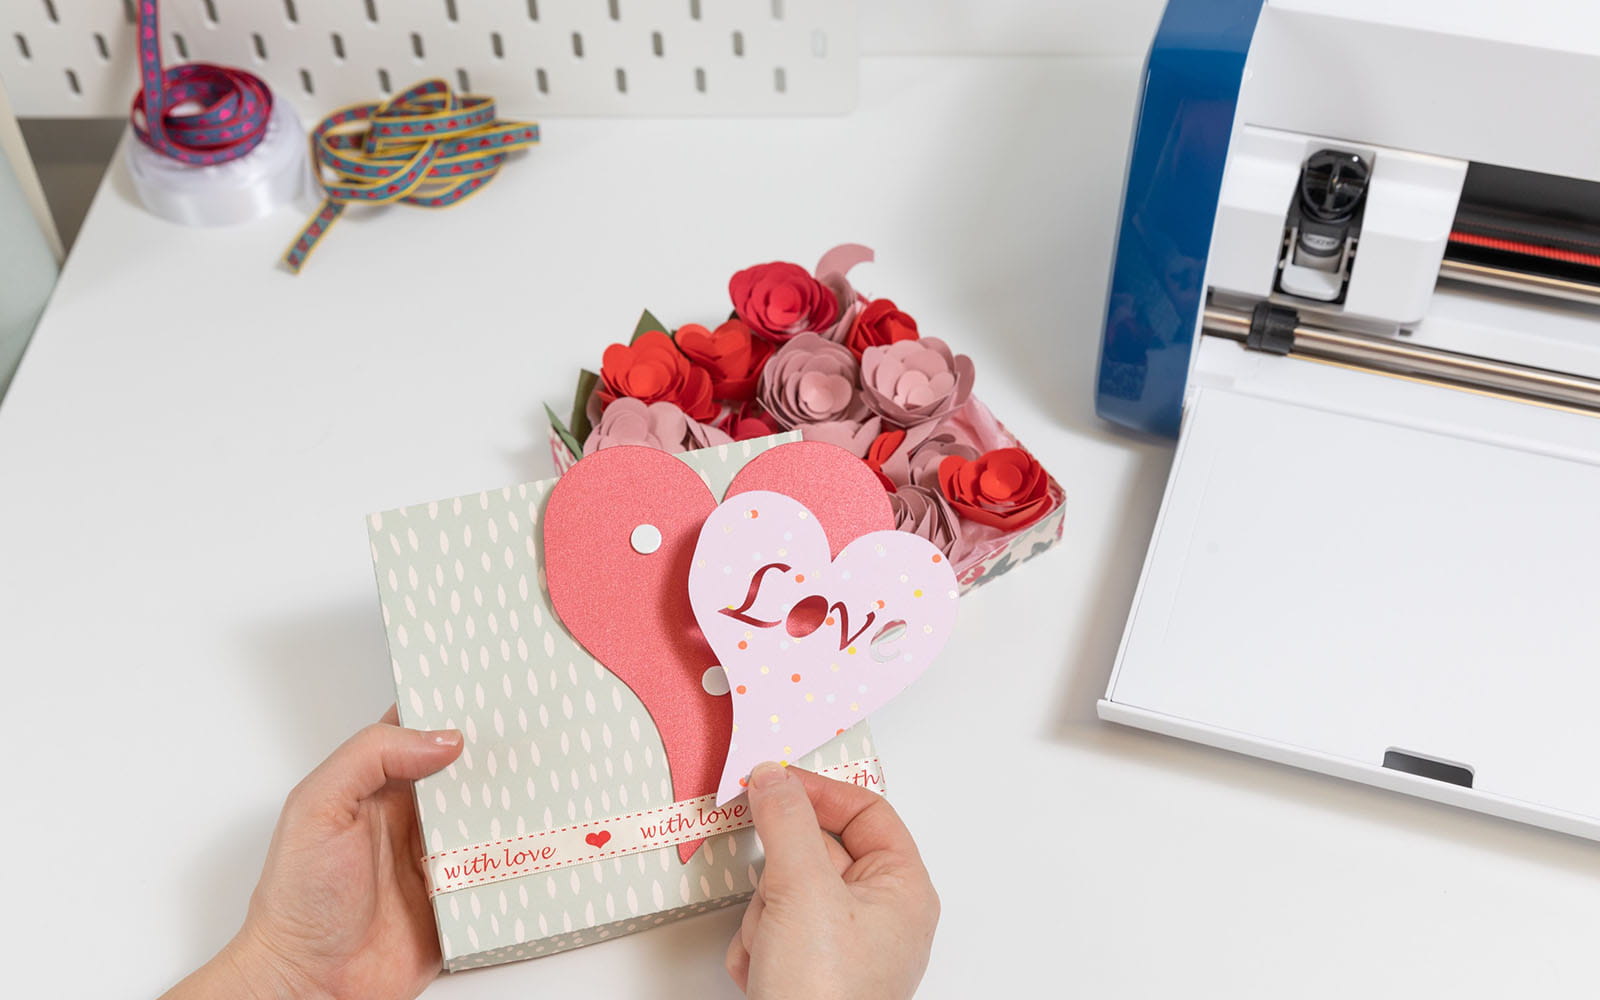 Hands sticking cut out heart with word love on to craft box lid